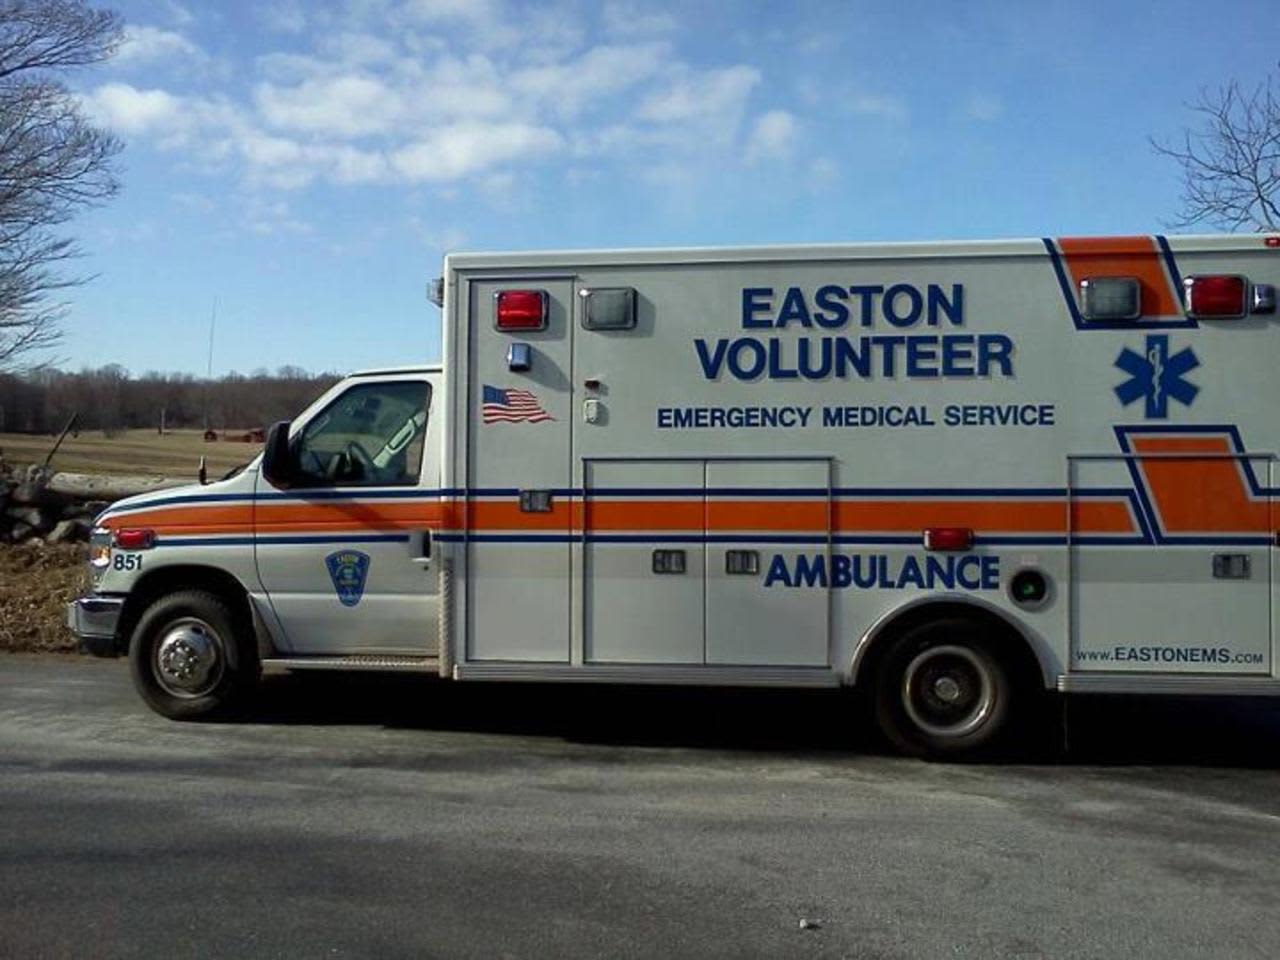 An ex-Easton EMT has been terminated and now faces larceny charges for alleged theft from the town of Easton.